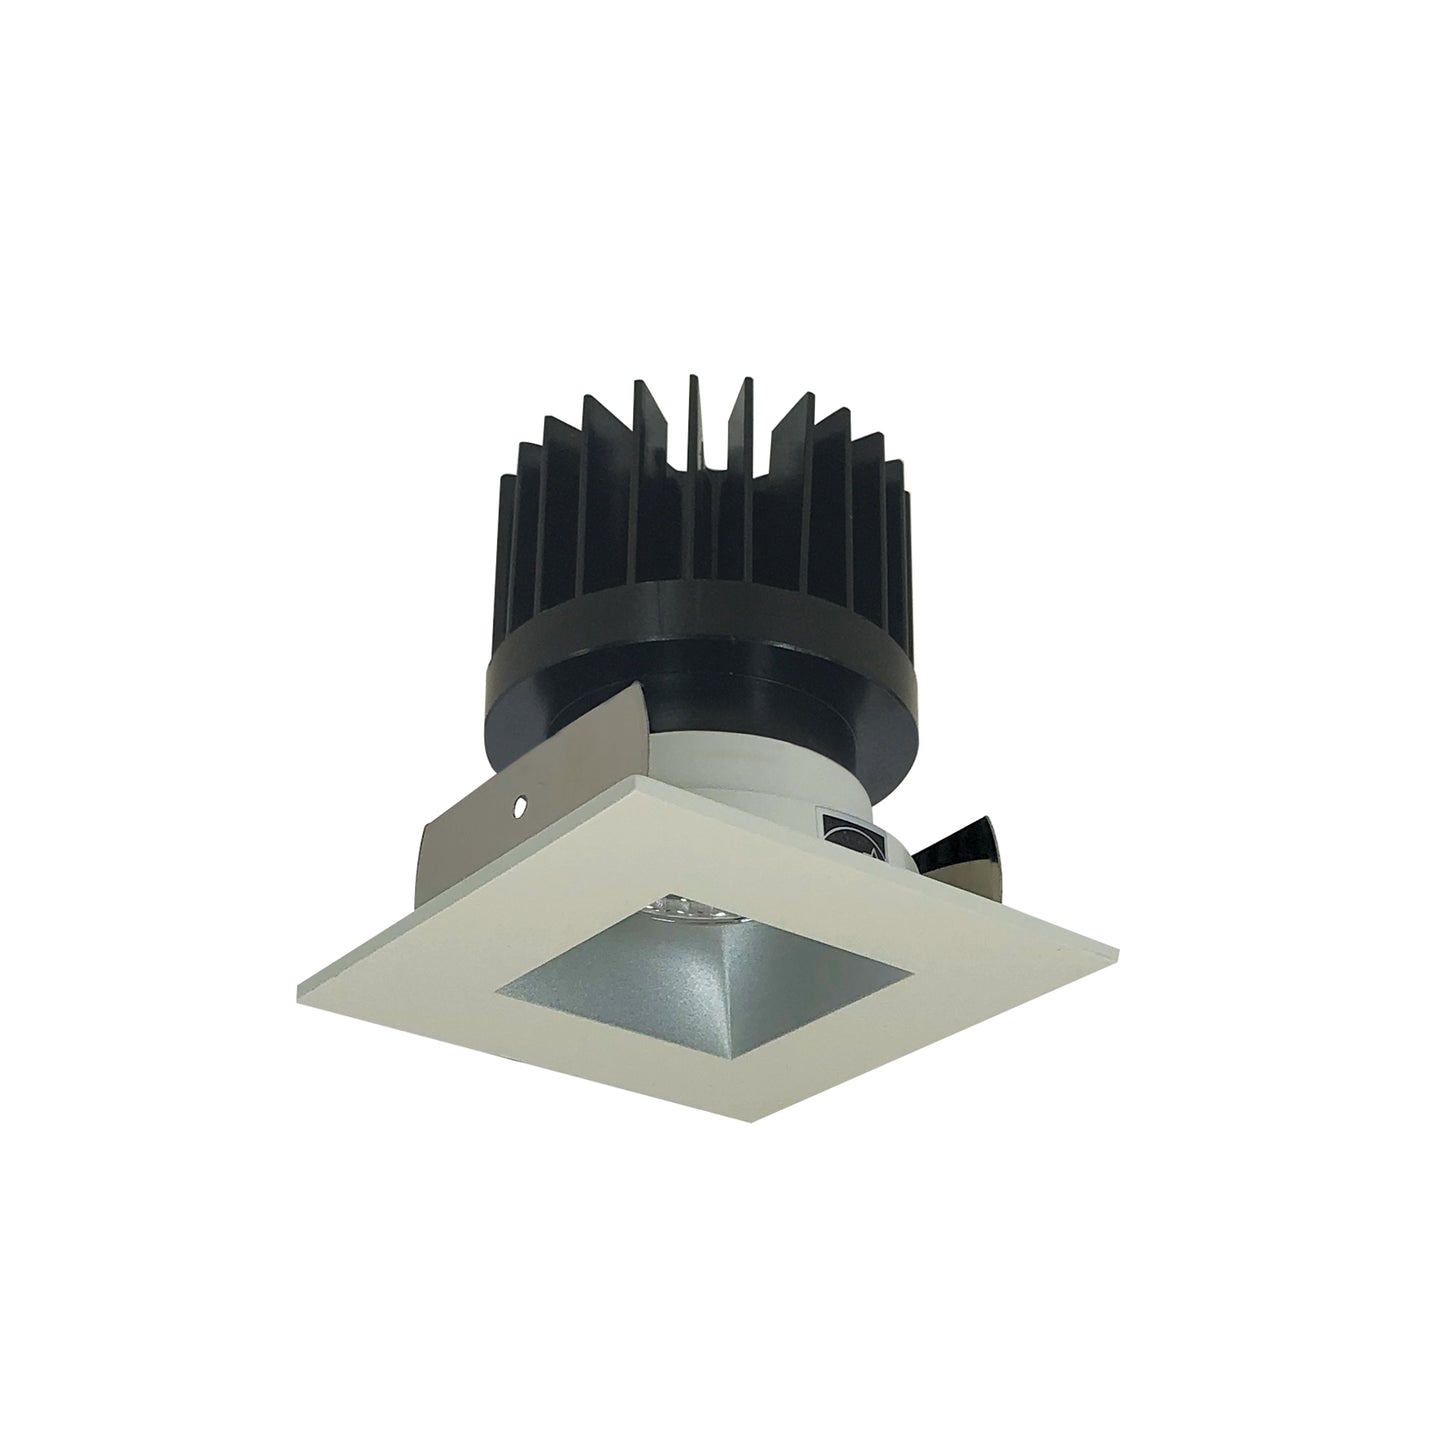 Nora Lighting 2" Iolite LED Square Reflector with Square Aperture, 1500lm/2000lm/2500lm (varies by housing), 3000K, Haze Reflector / White Flange NIOB-2SNDSQ30XHW/HL